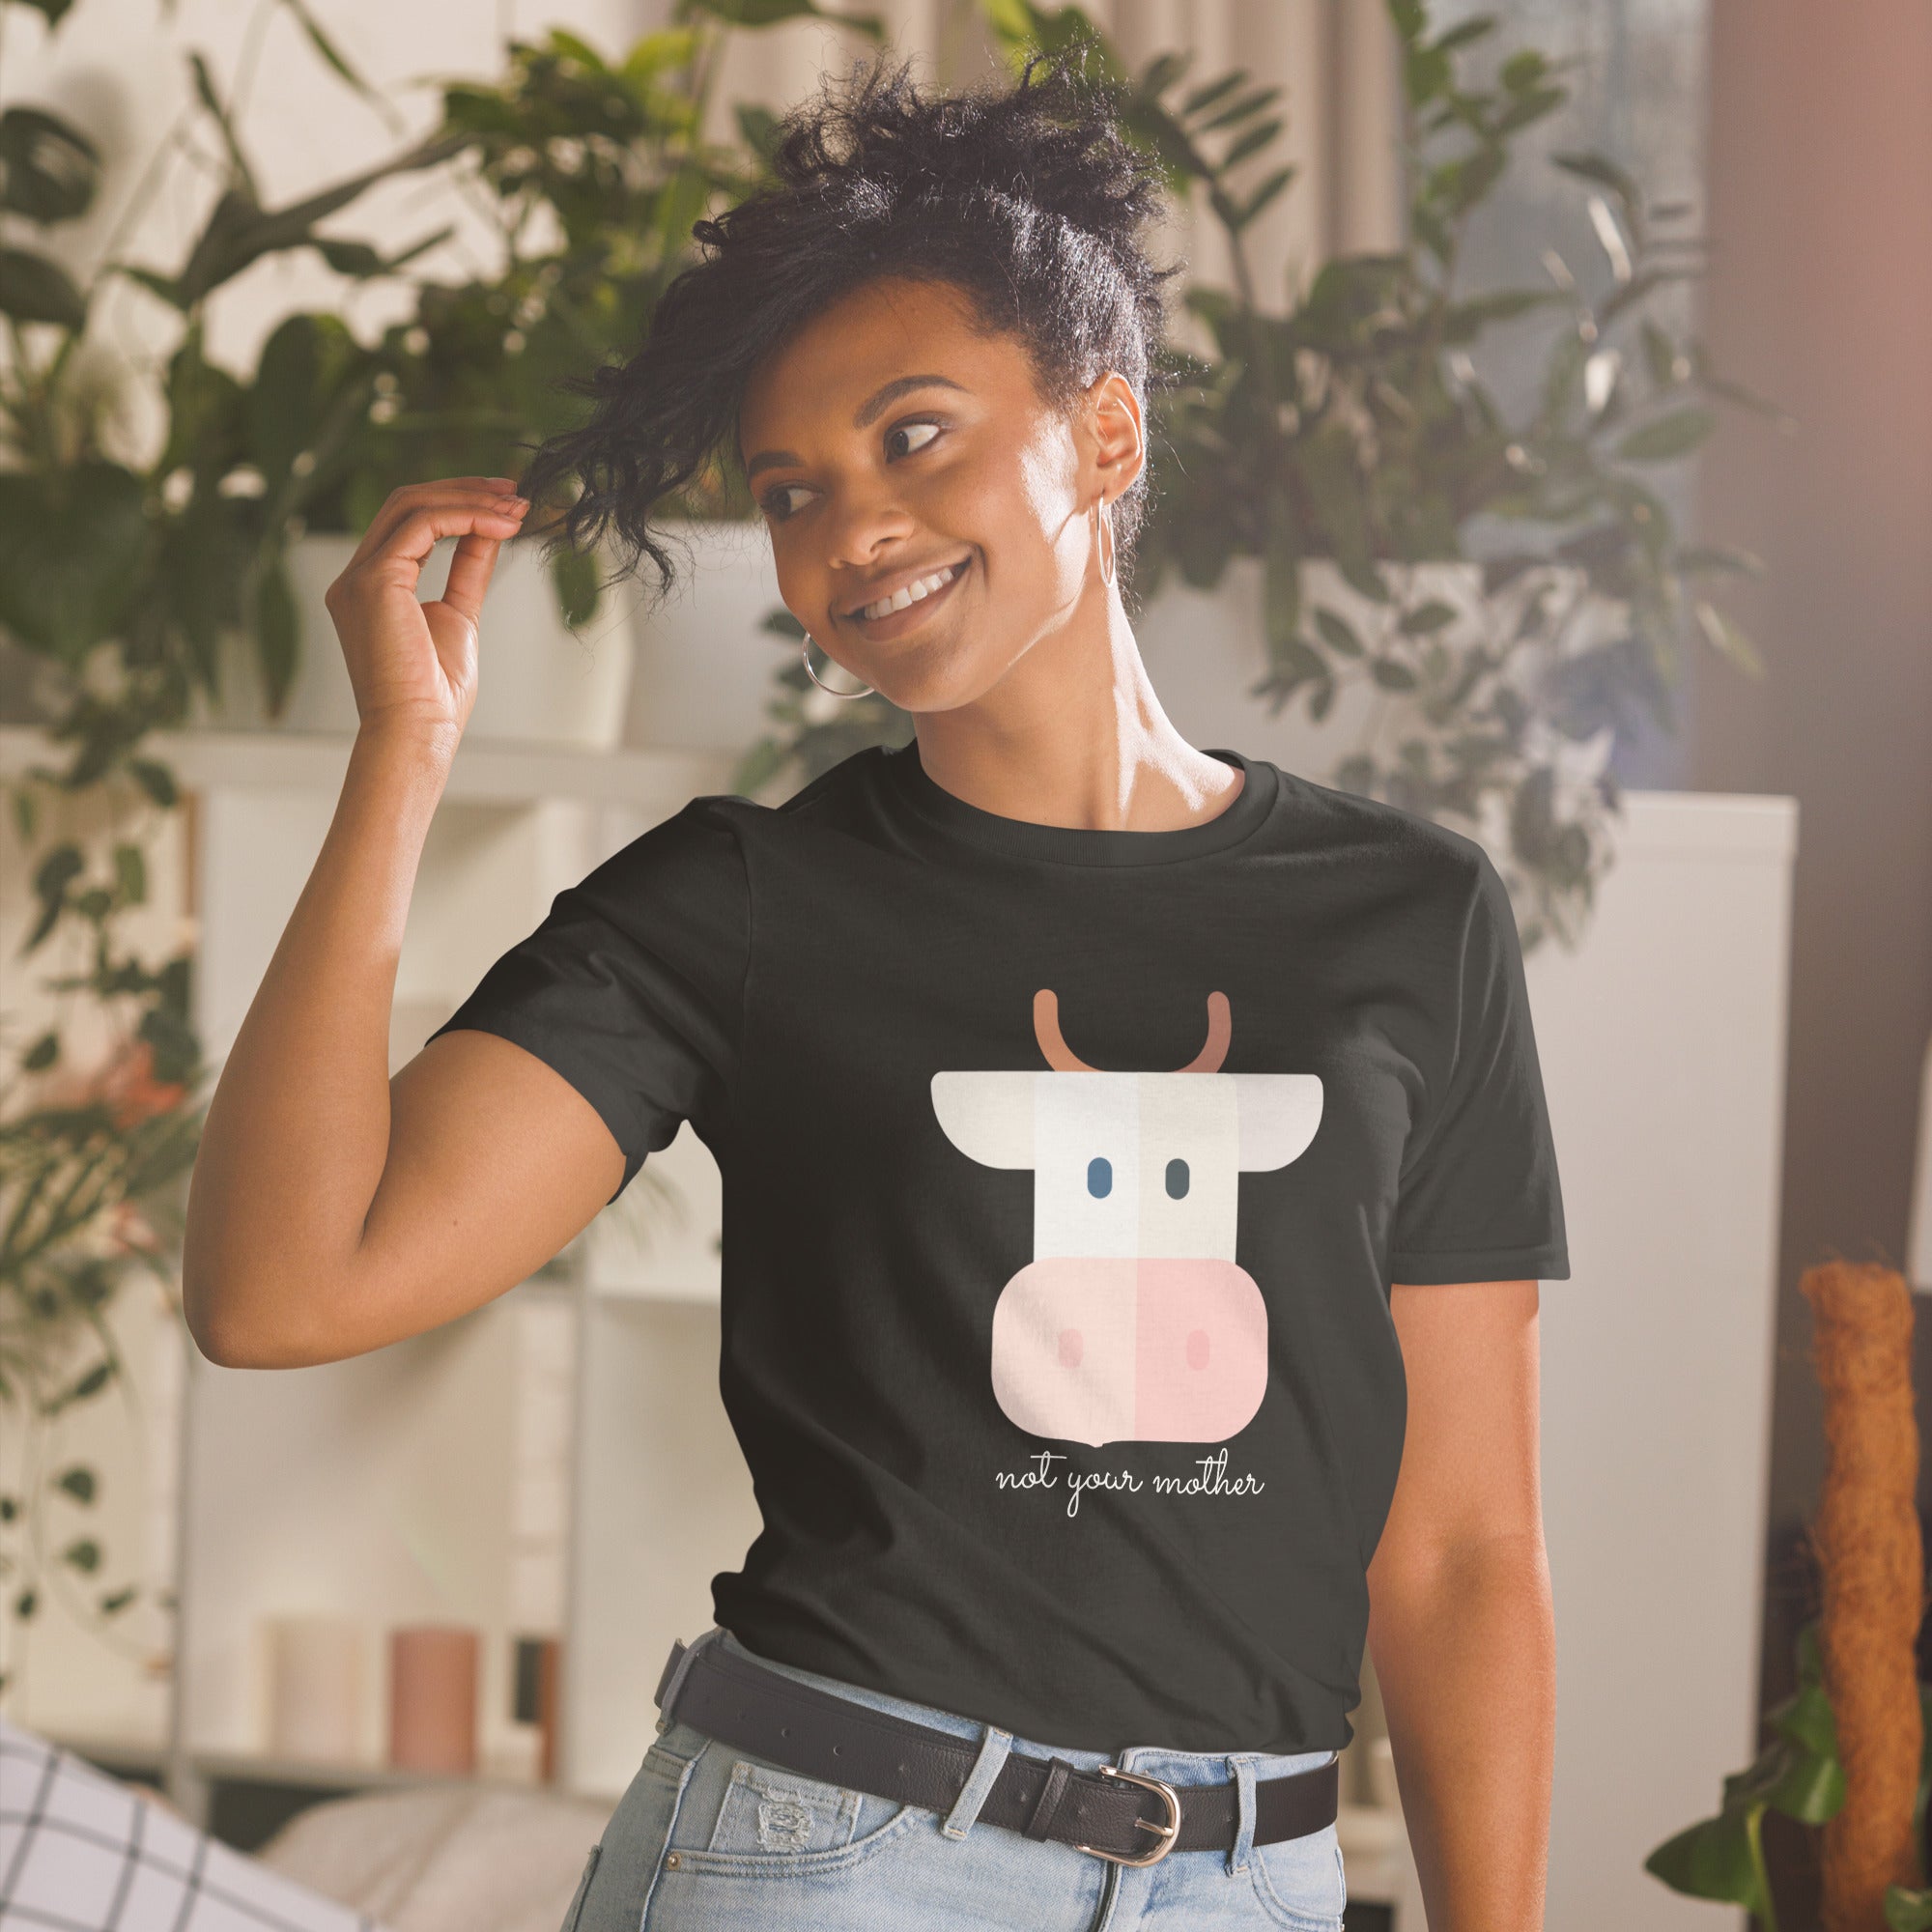 Bold Kawaii cow print with the words 'not your mother' in cursive script below it. T-shirt and sweatshirt prints designed specifically for vegans in mind! Vegan clothing, vegan sweatshirt, vegan t-shirt, vegan lounge wear